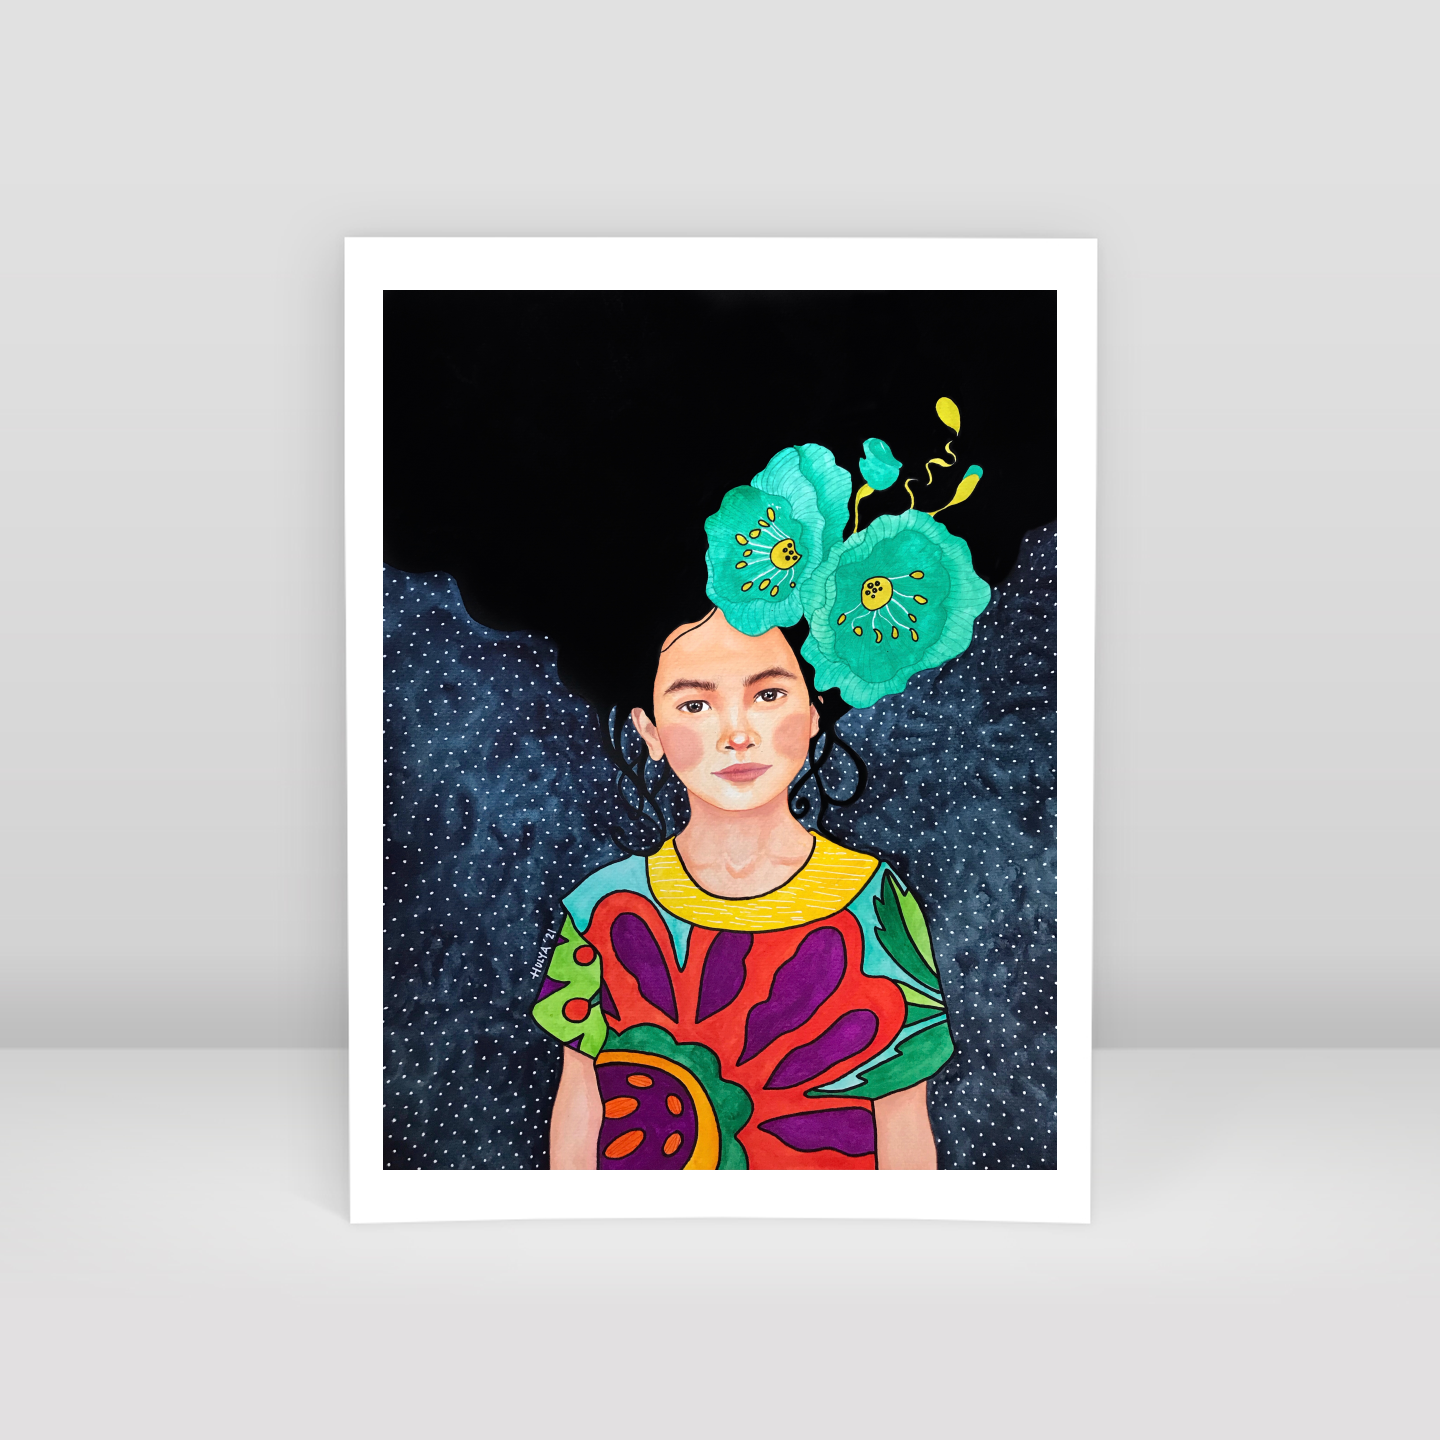 i star in this movie - Art Print